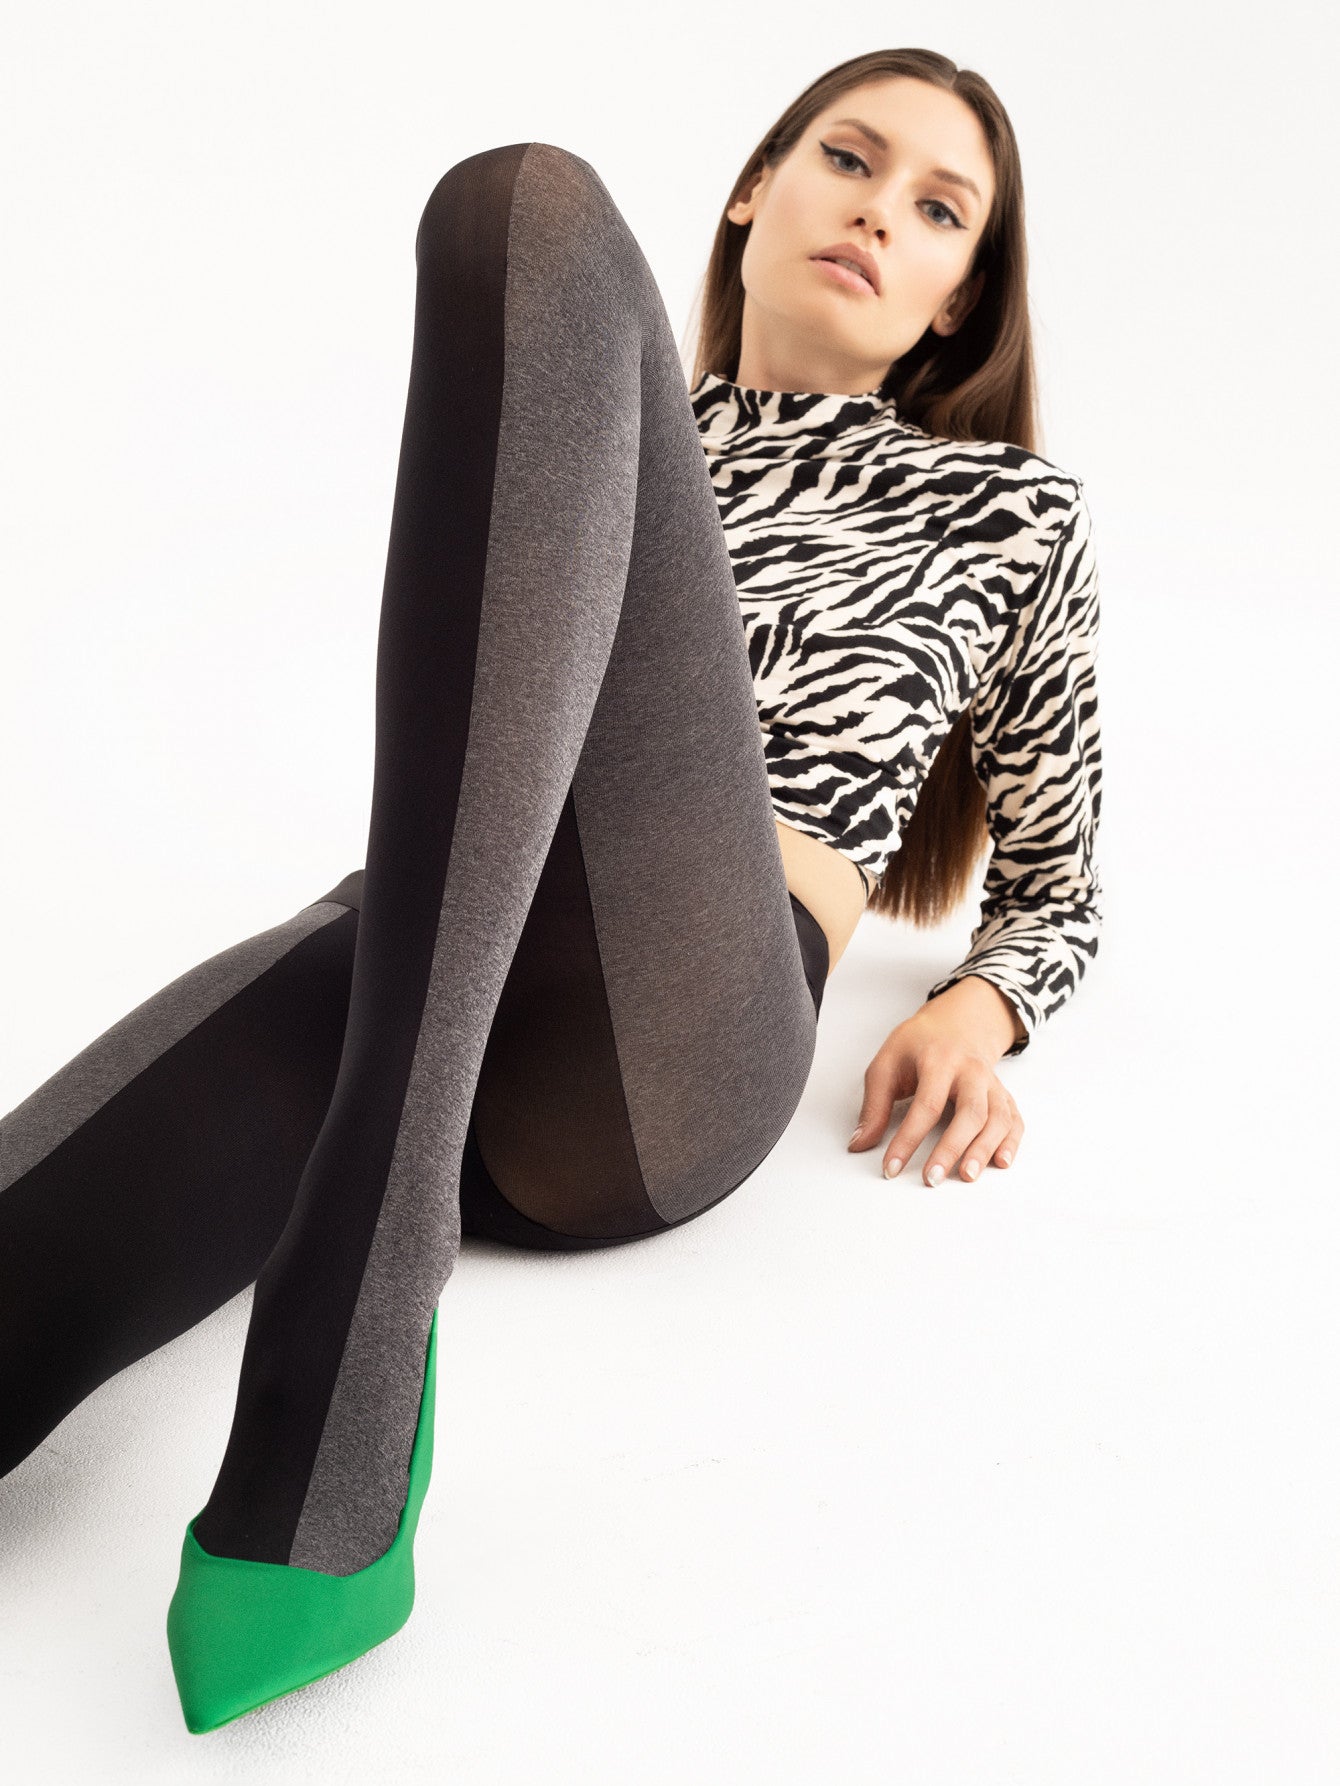 Fiore Lab Noir Tights - Opaque fashion tights with two toned legs, the inside leg is black and the outside is a flecky grey.